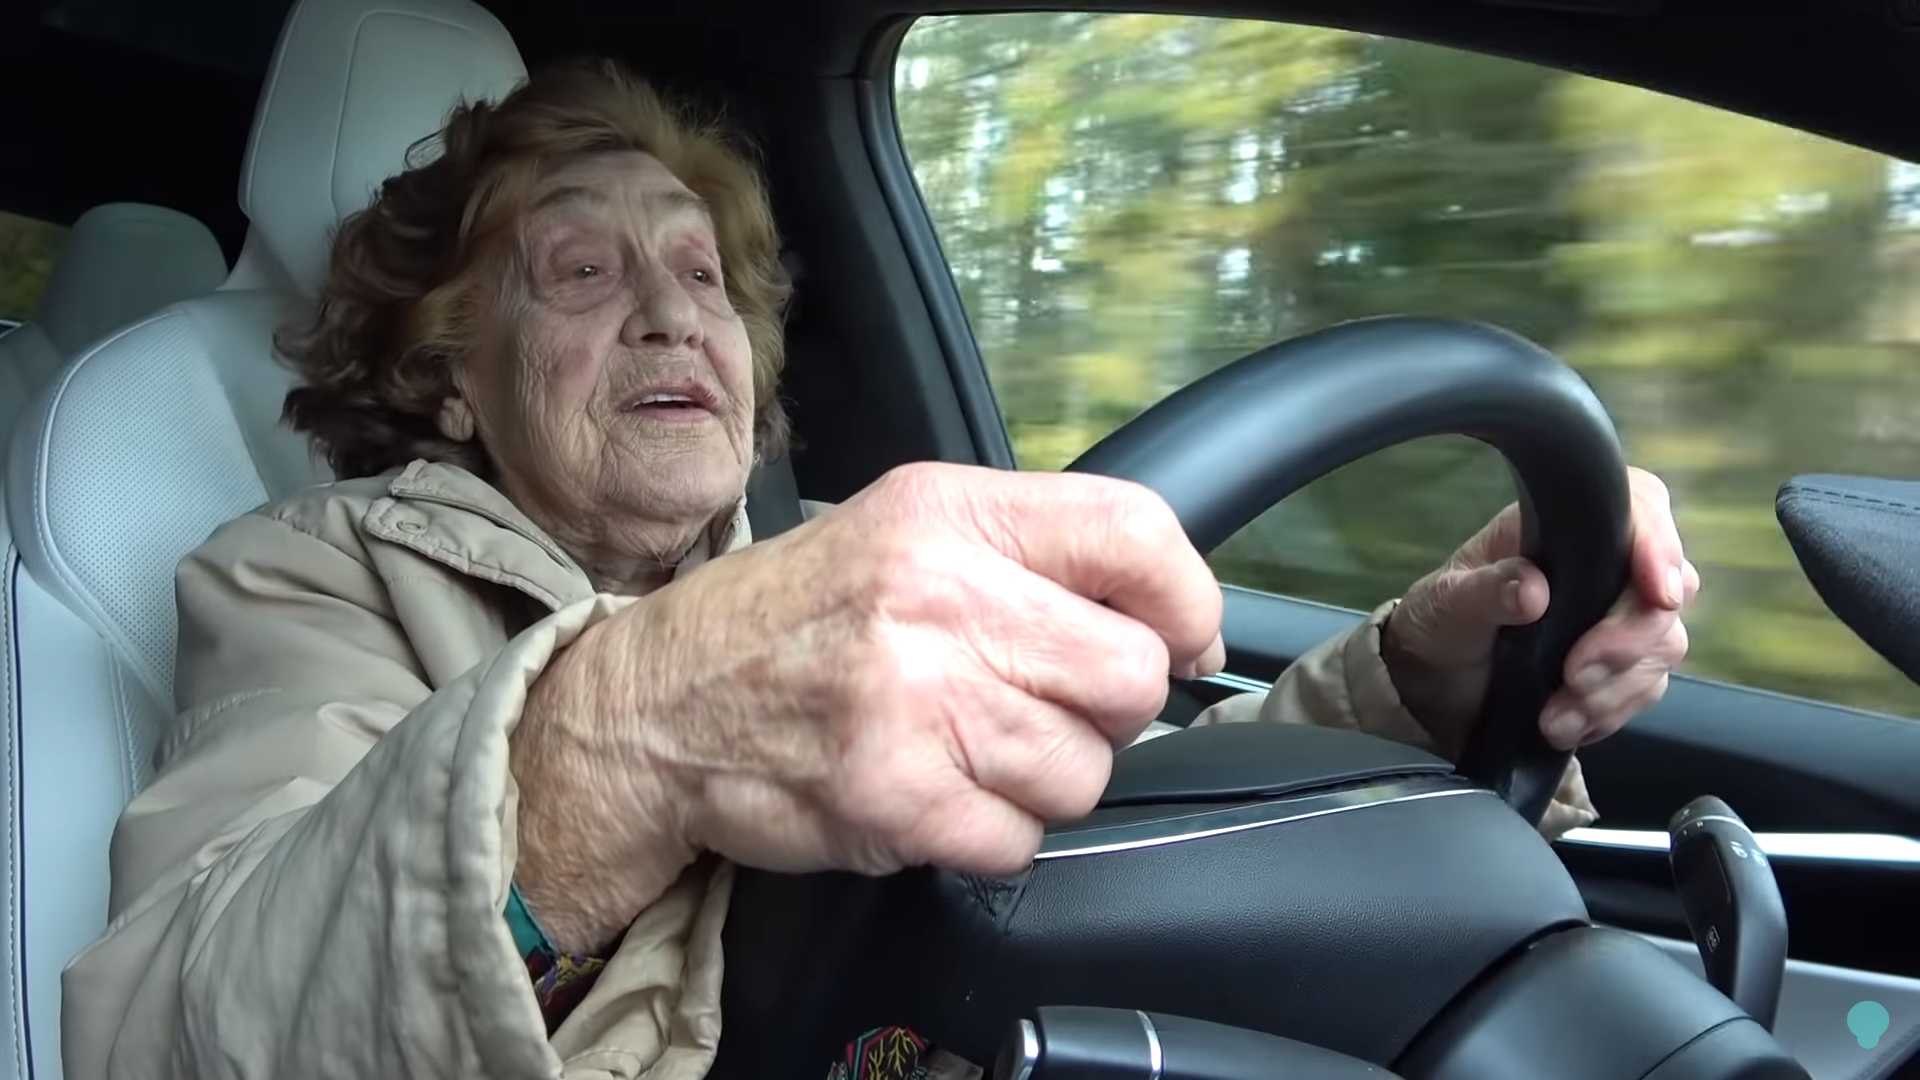 do-you-have-any-info-on-this-92-year-old-lady-that-drove-a-tesla-model-x.jpg